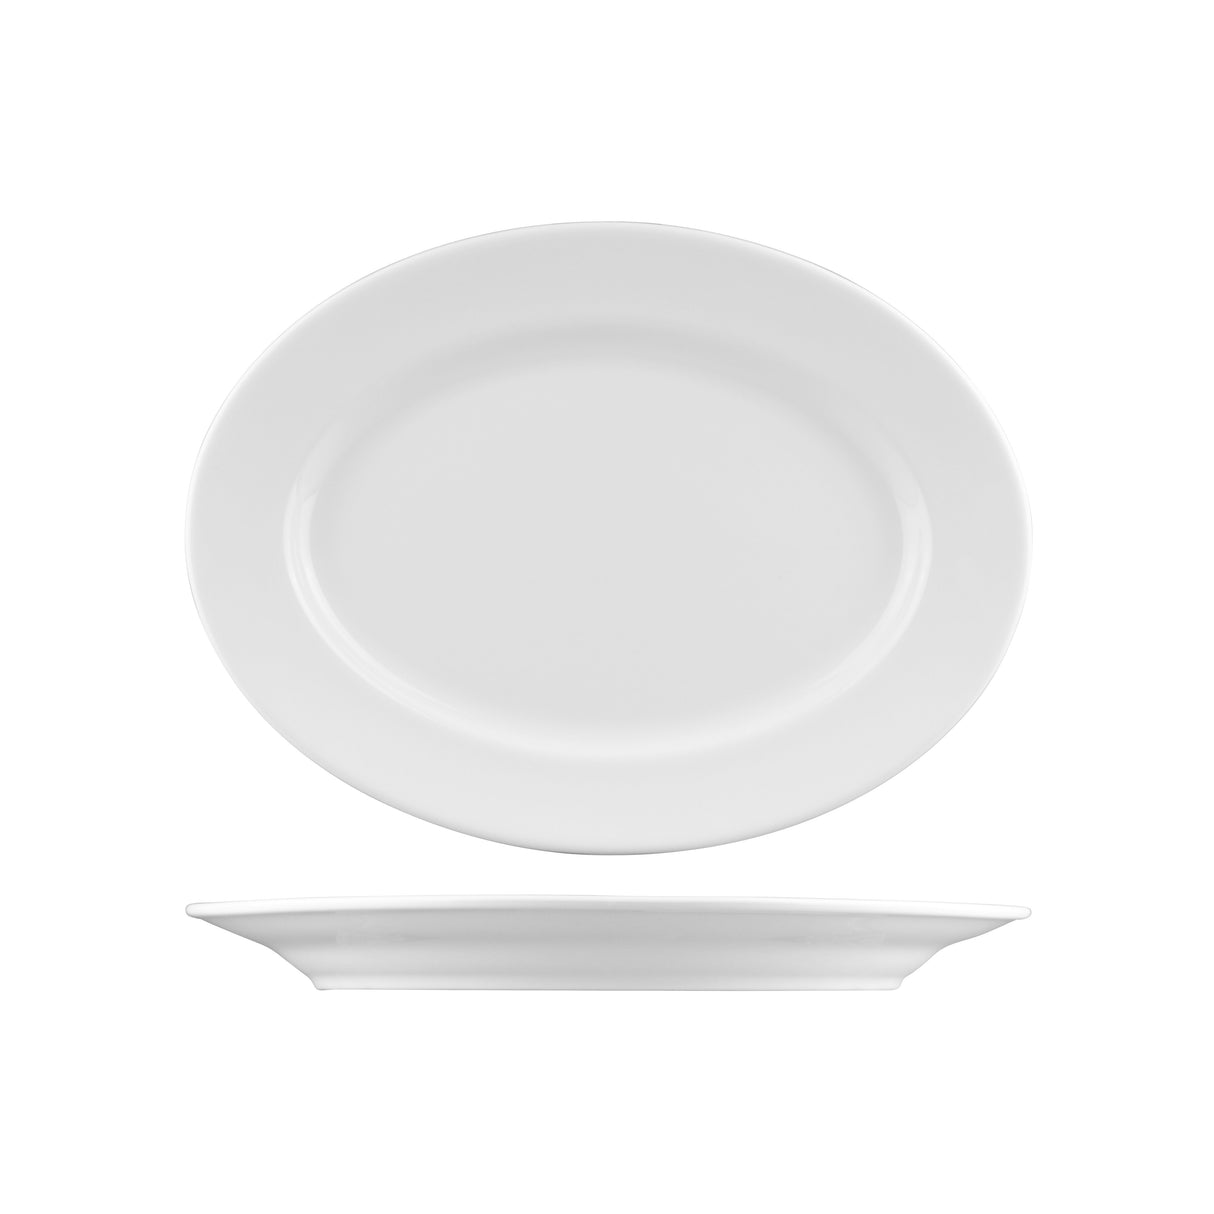 Oval Platter - 290Mm, Ilona from Fortessa. made out of Bone China and sold in boxes of 6. Hospitality quality at wholesale price with The Flying Fork! 